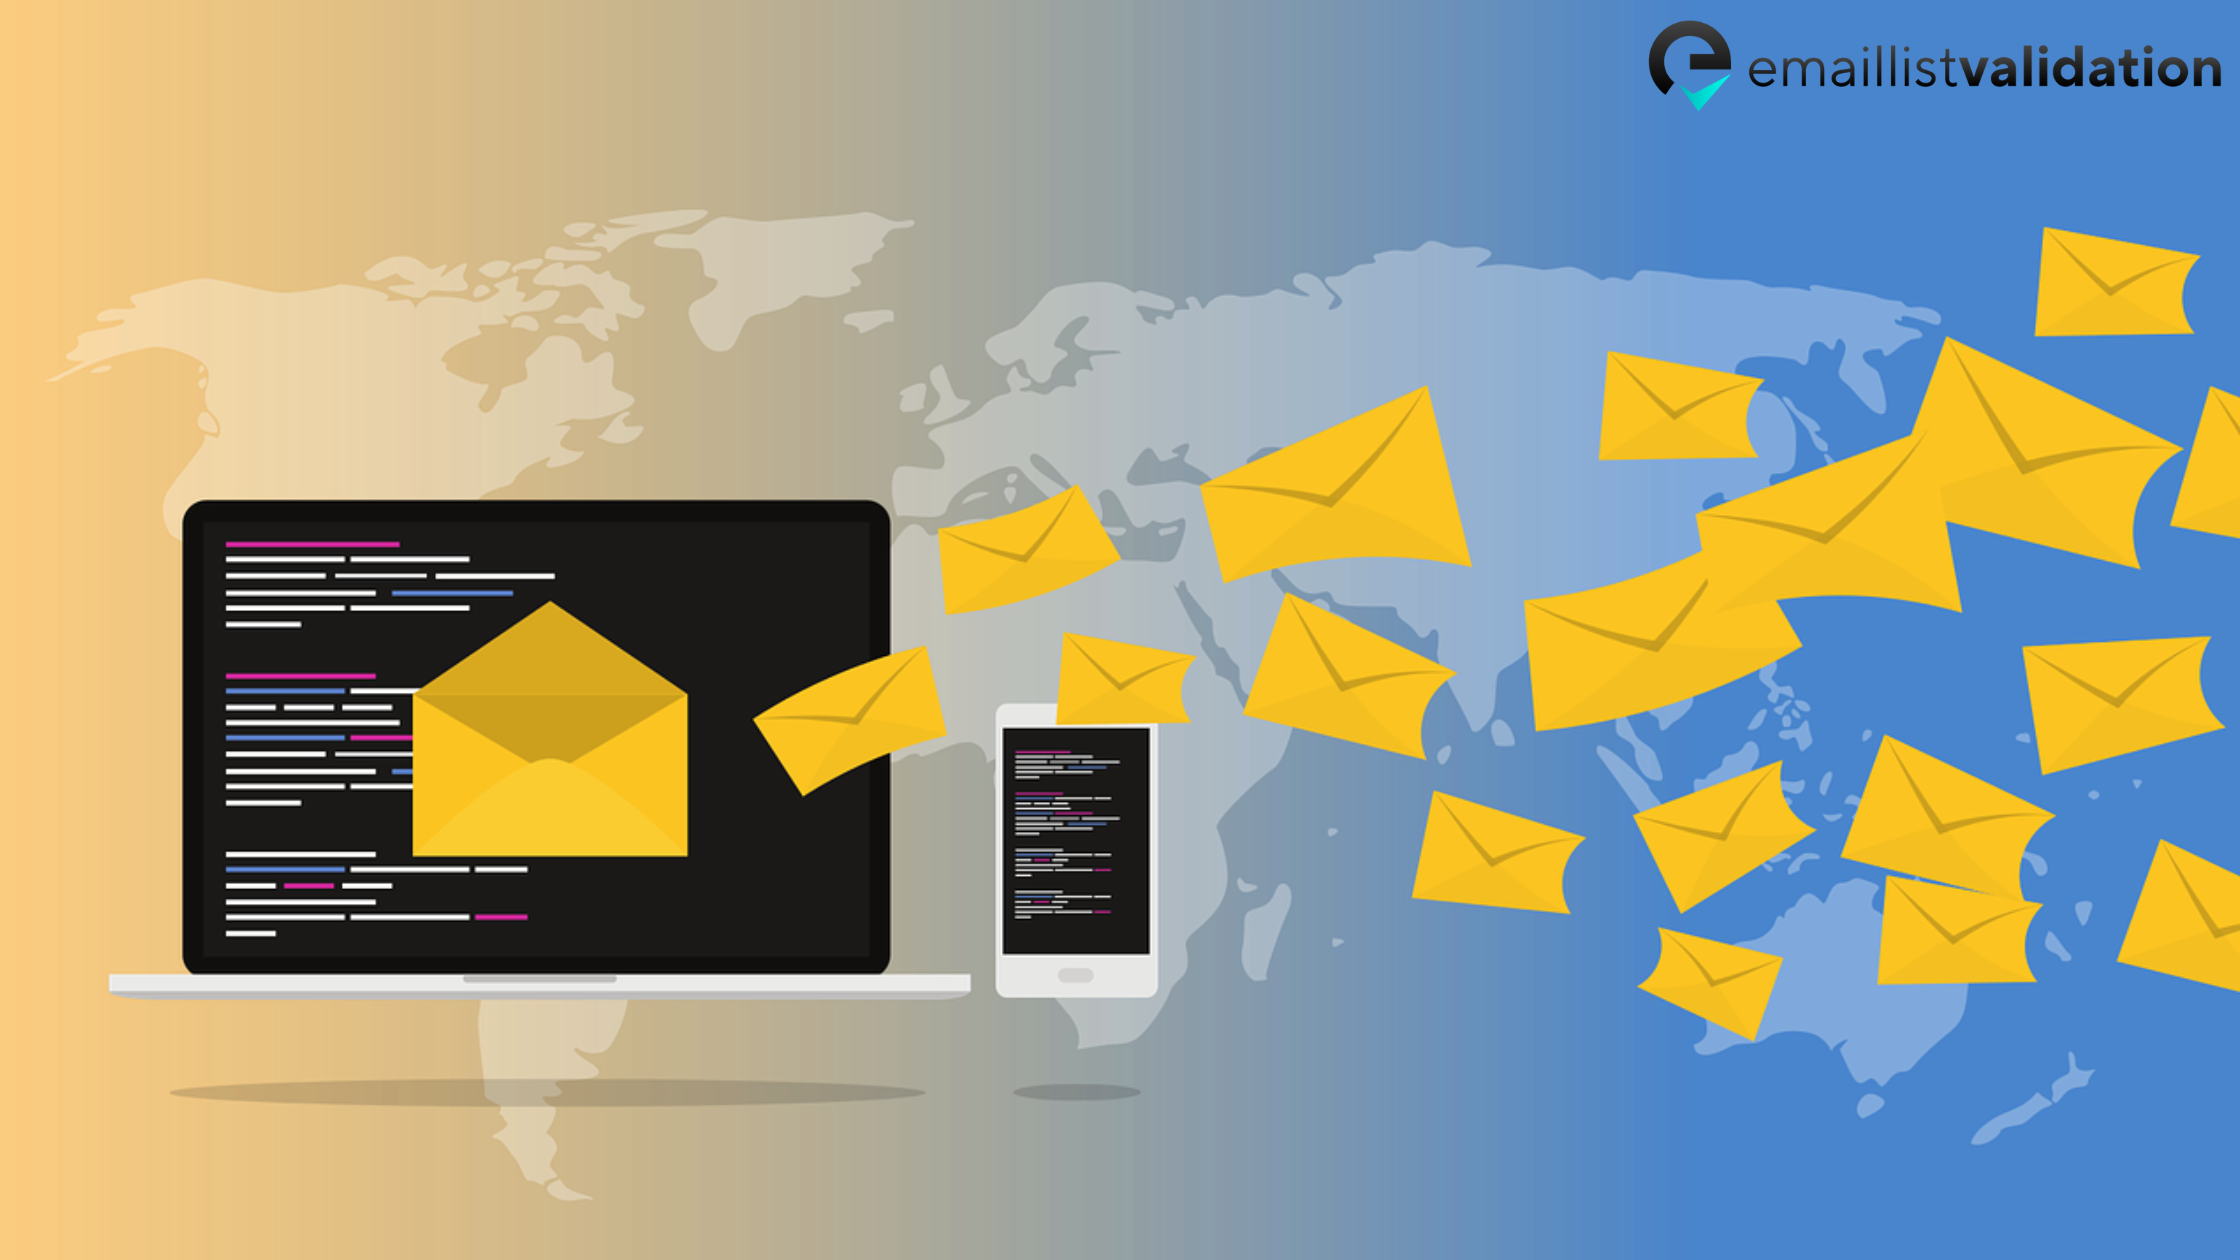 How to test an email address before sending